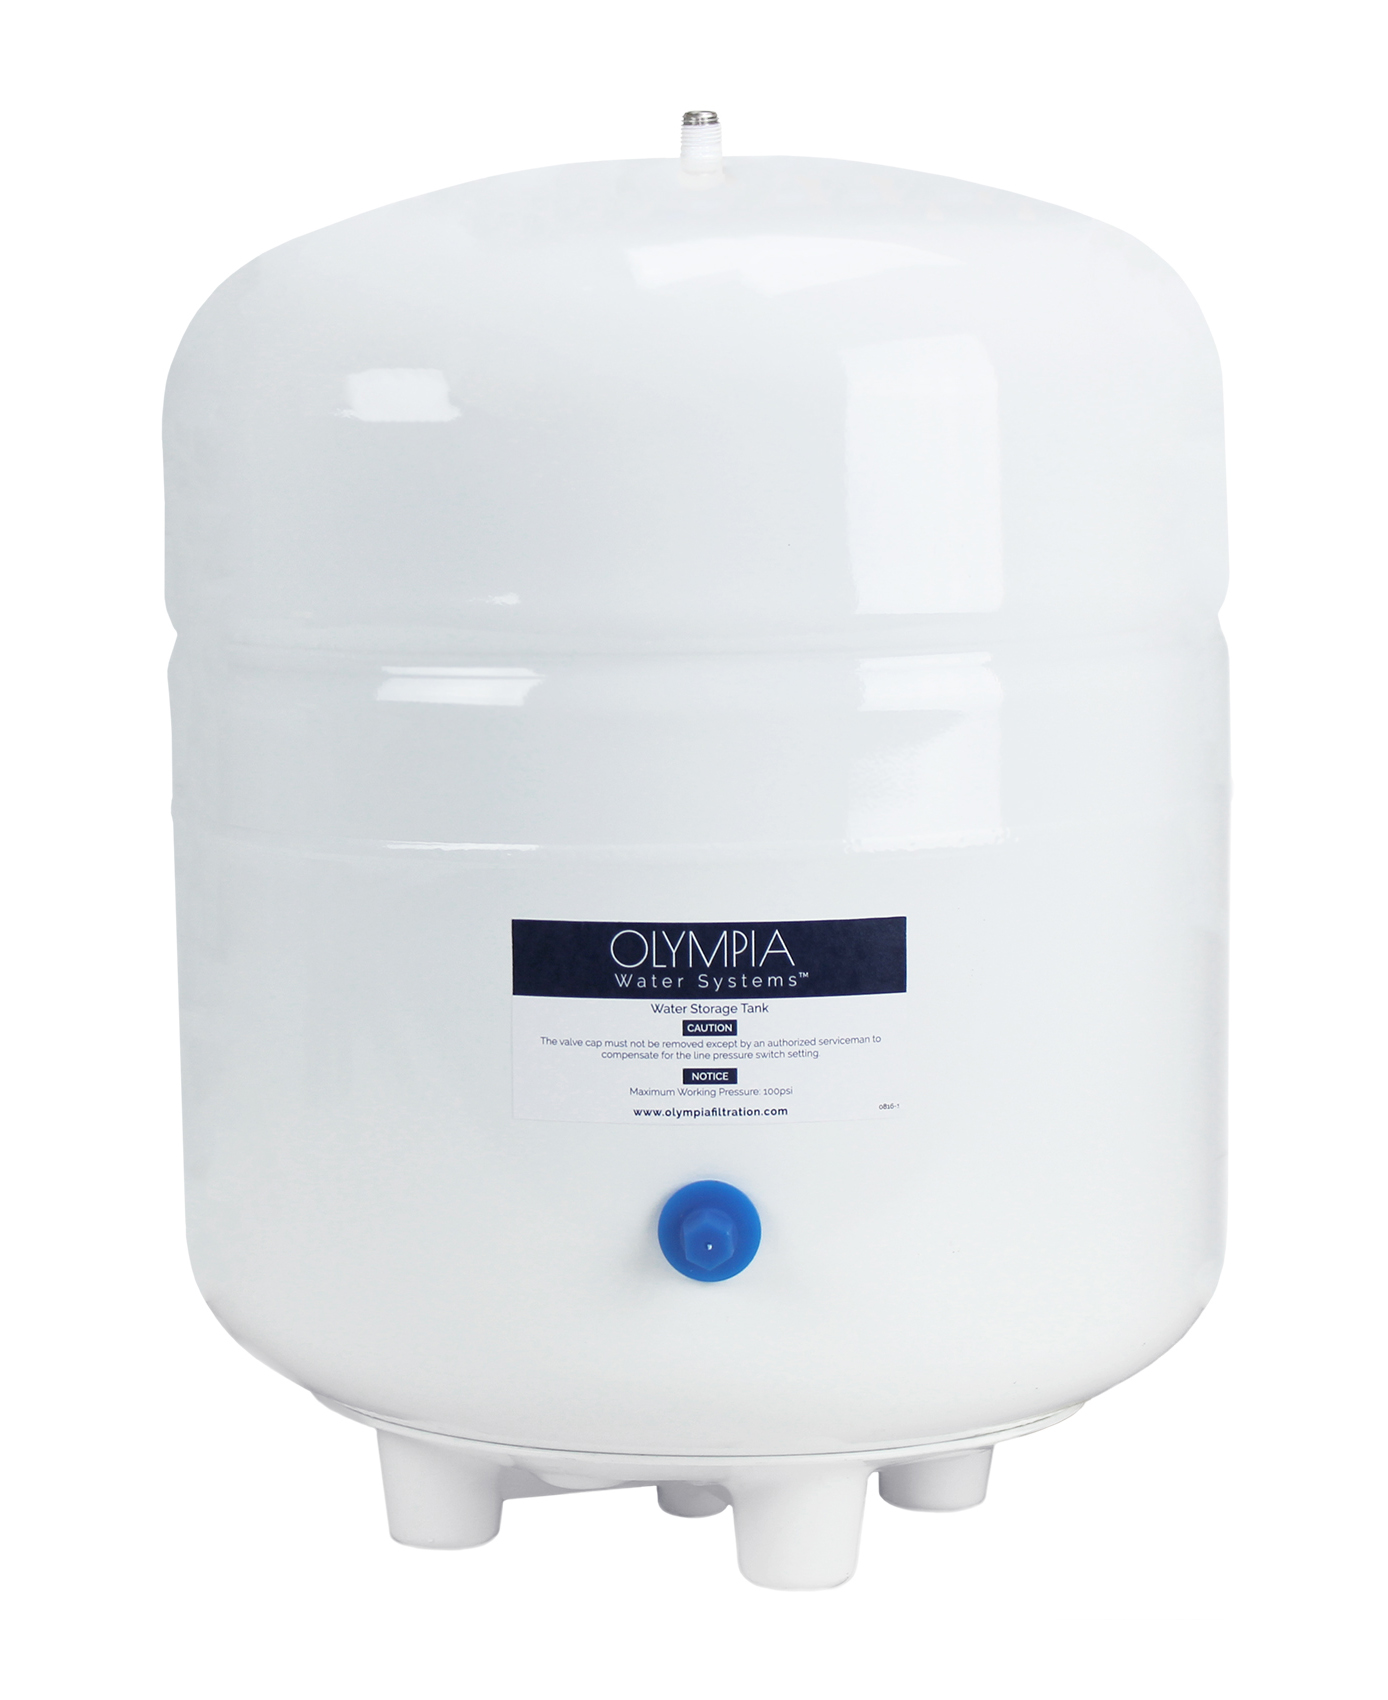 RO Water Storage Tank 3.2 Gallon Olympia Water Systems